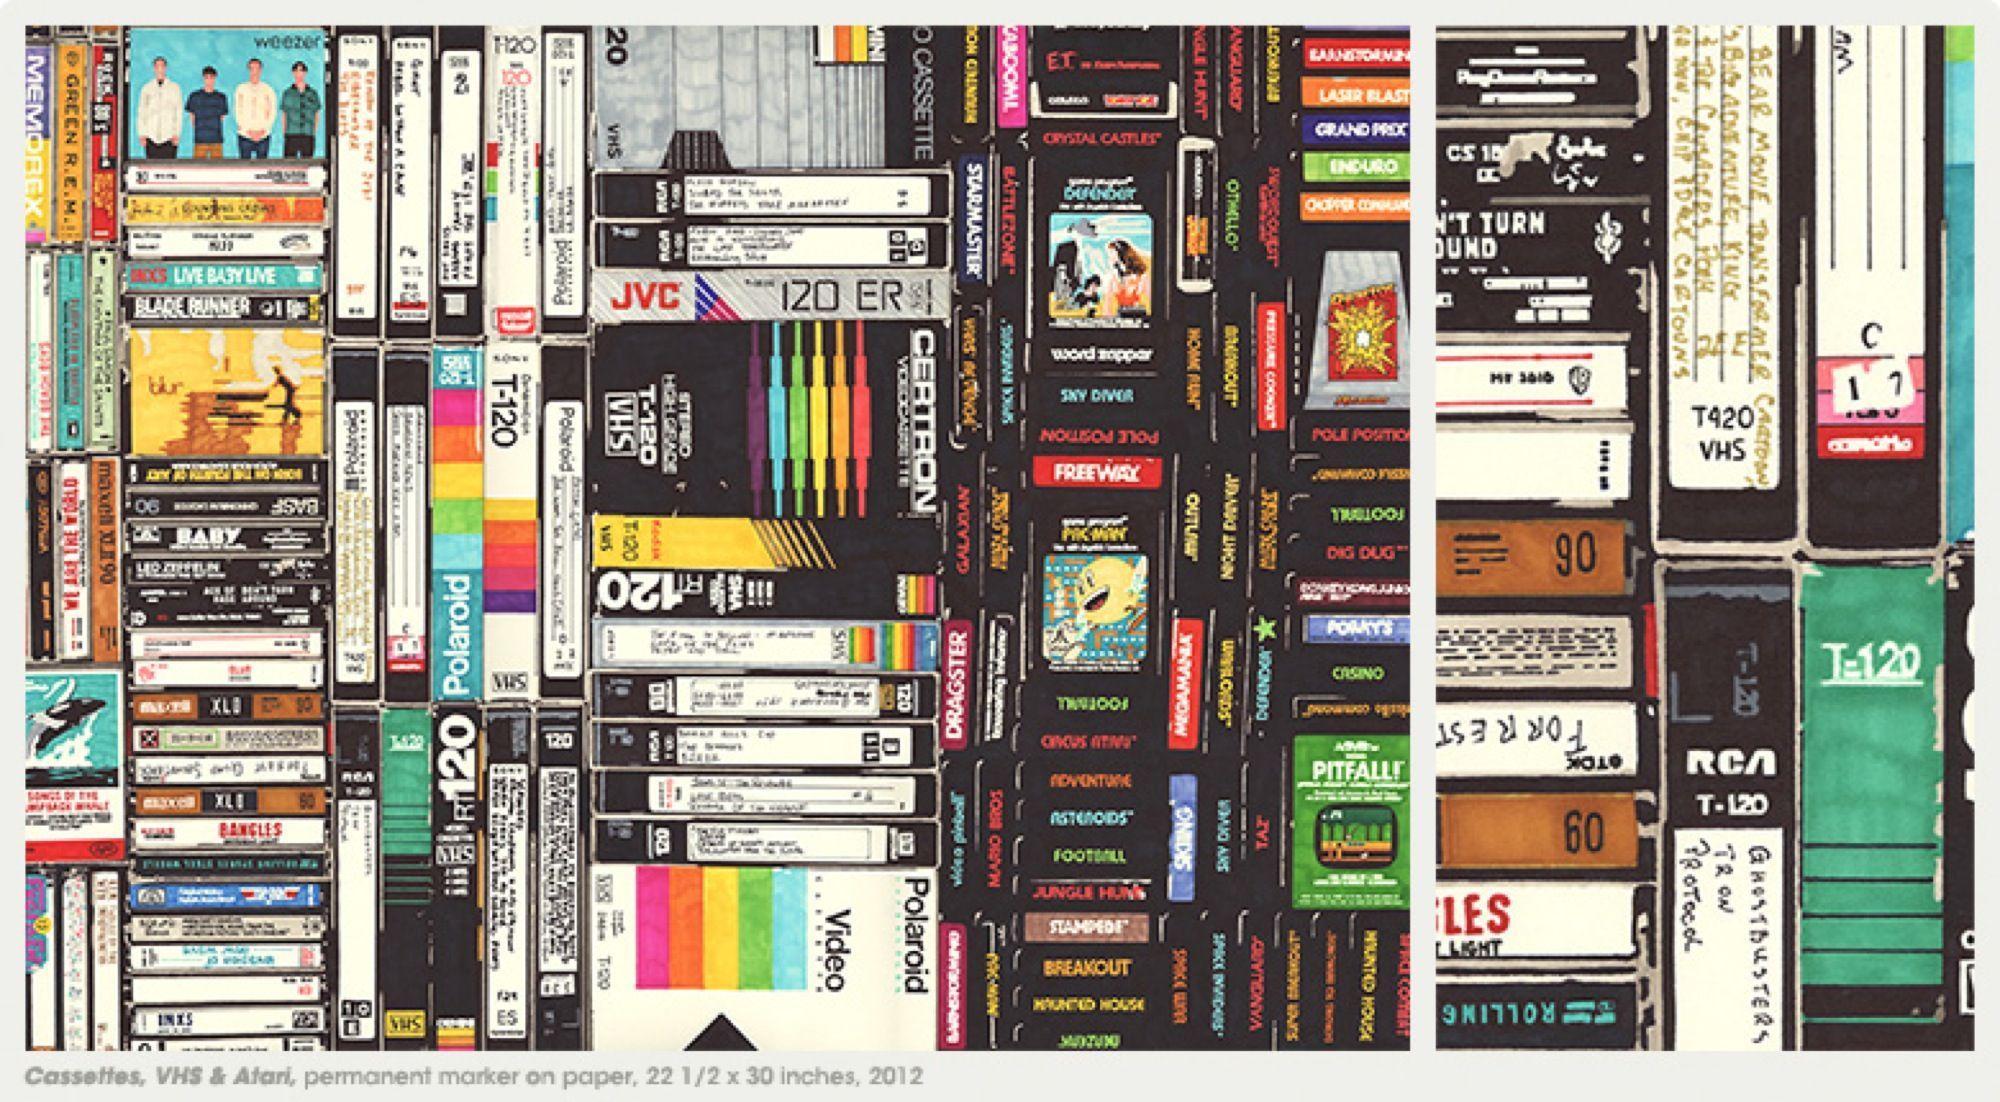 Vhs Film Background Aesthetic - Find gifs with the latest and newest ...